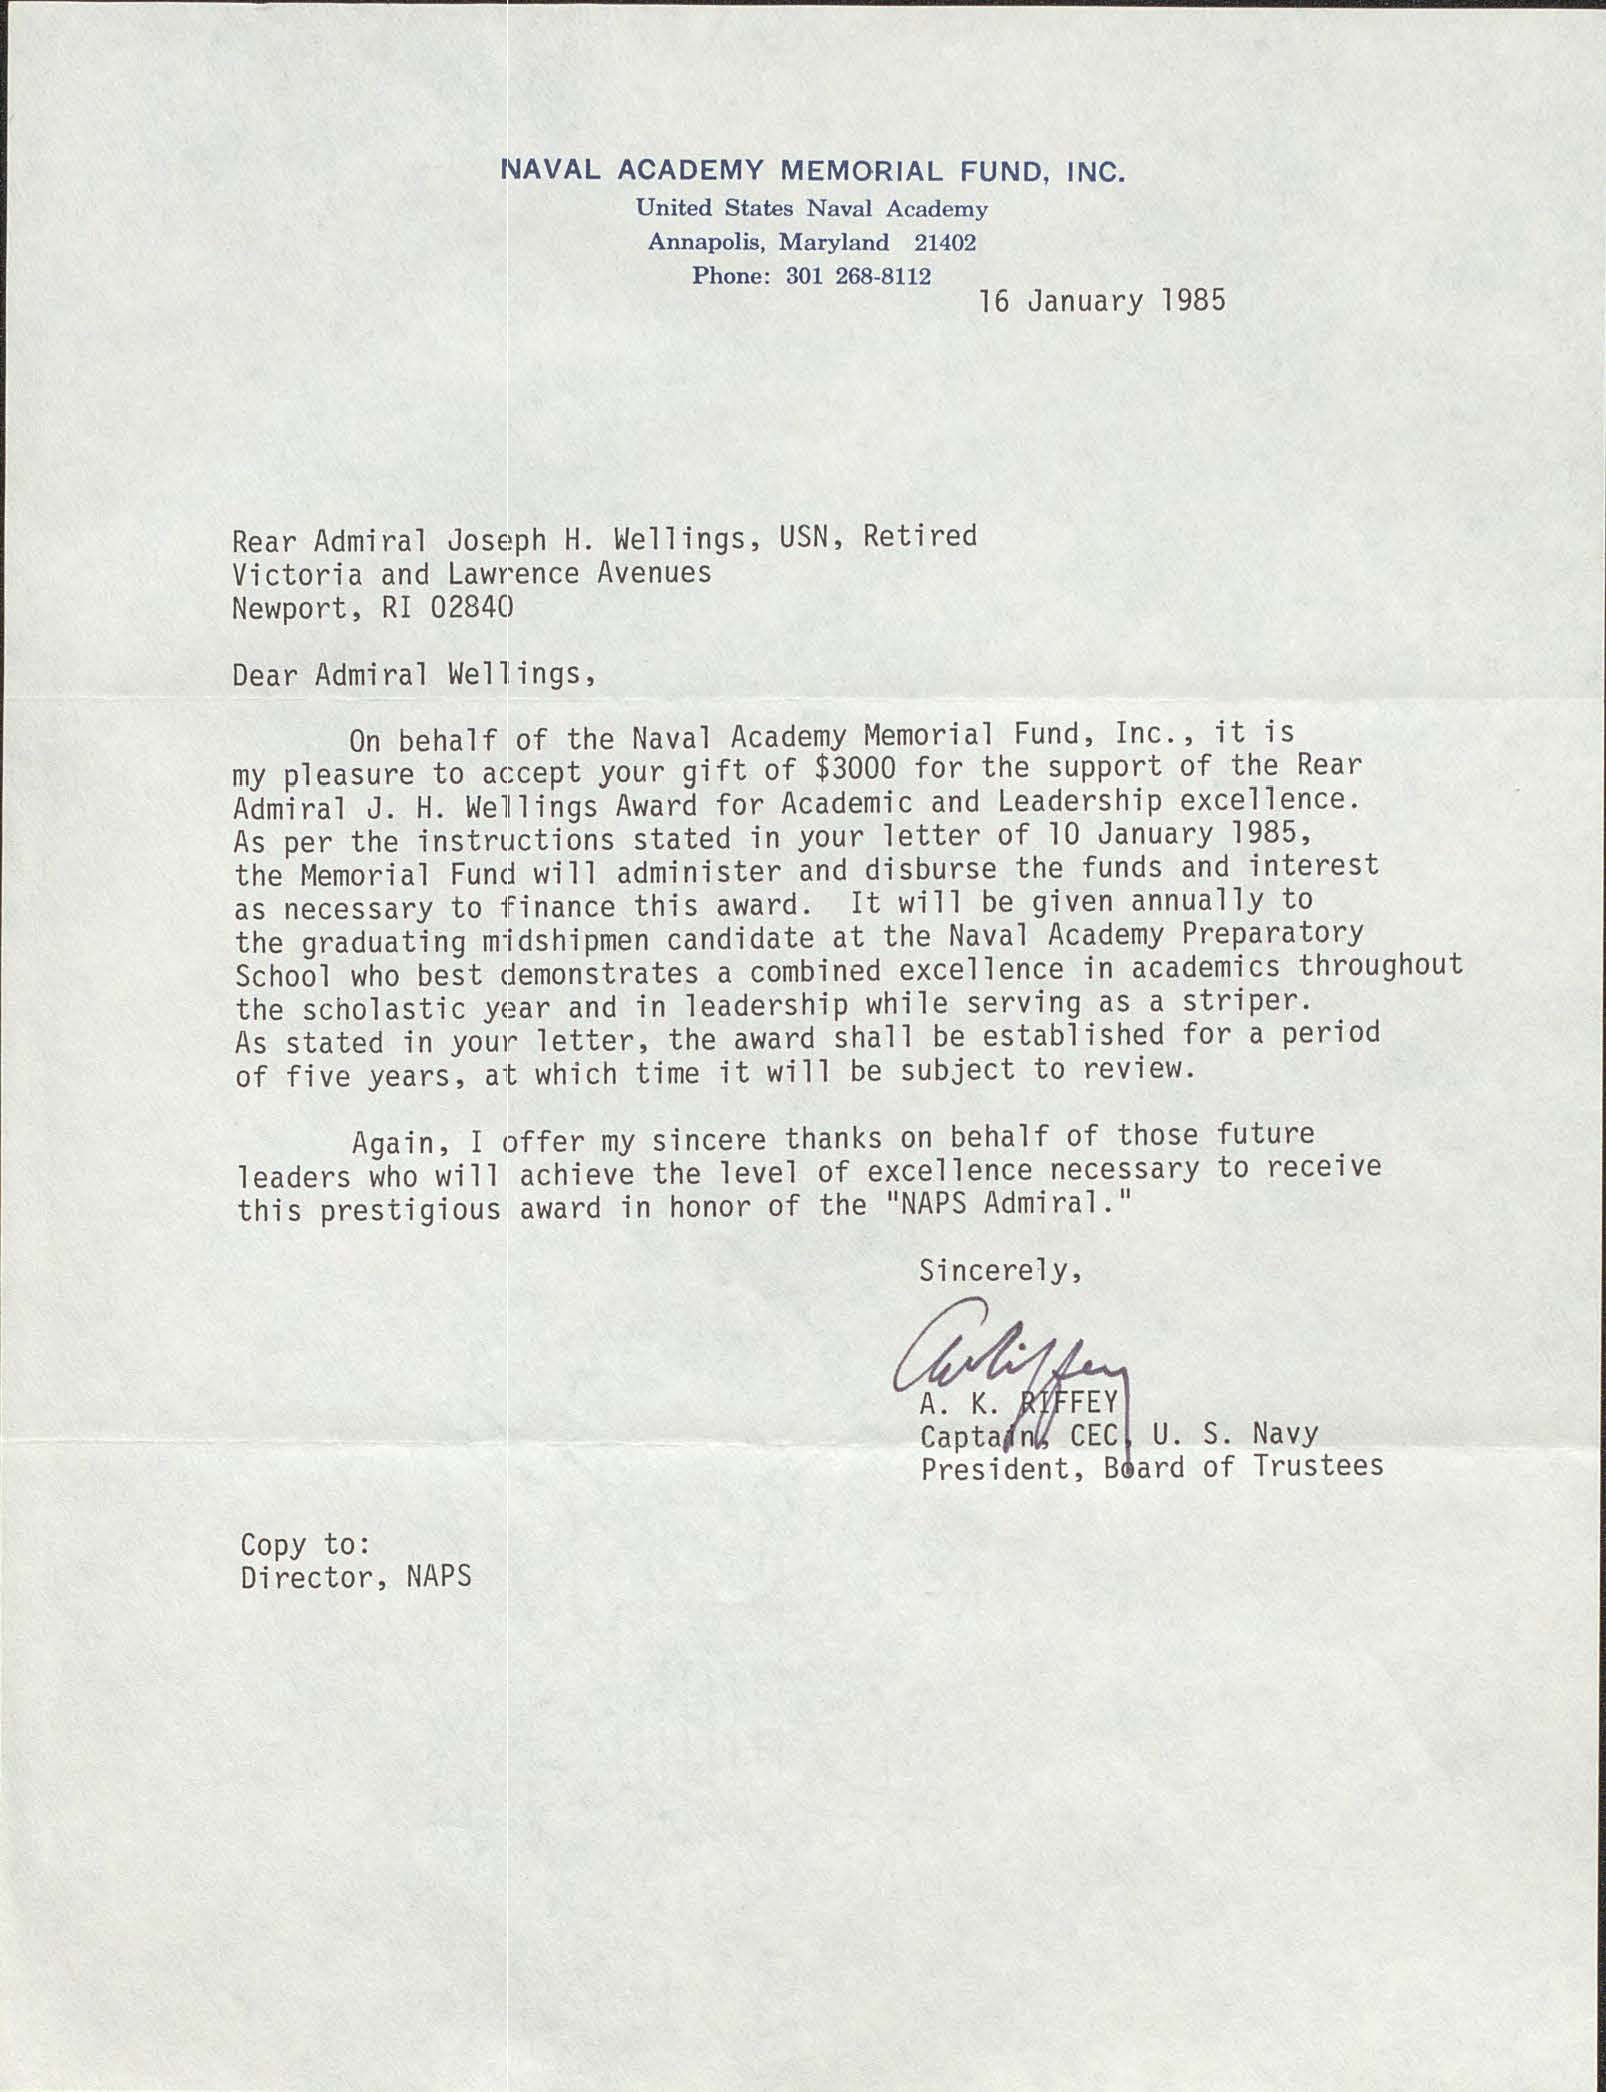 Letter from Captain A. K. Riffey to RADM Joseph H. Wellings